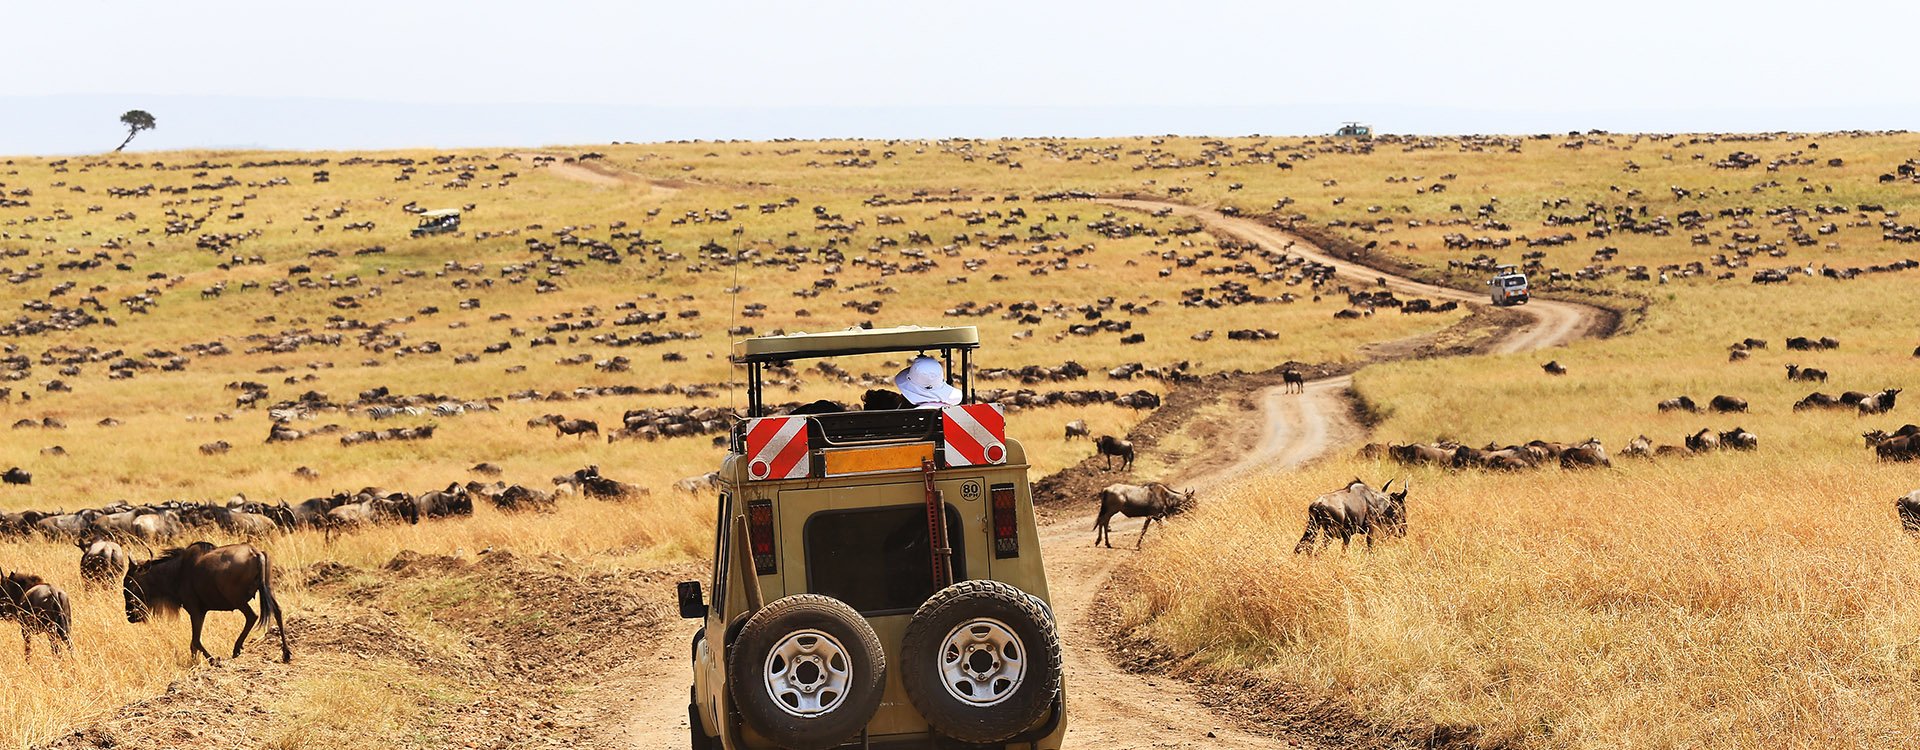 Safari Game Drive during The Great Wildebeest Migration